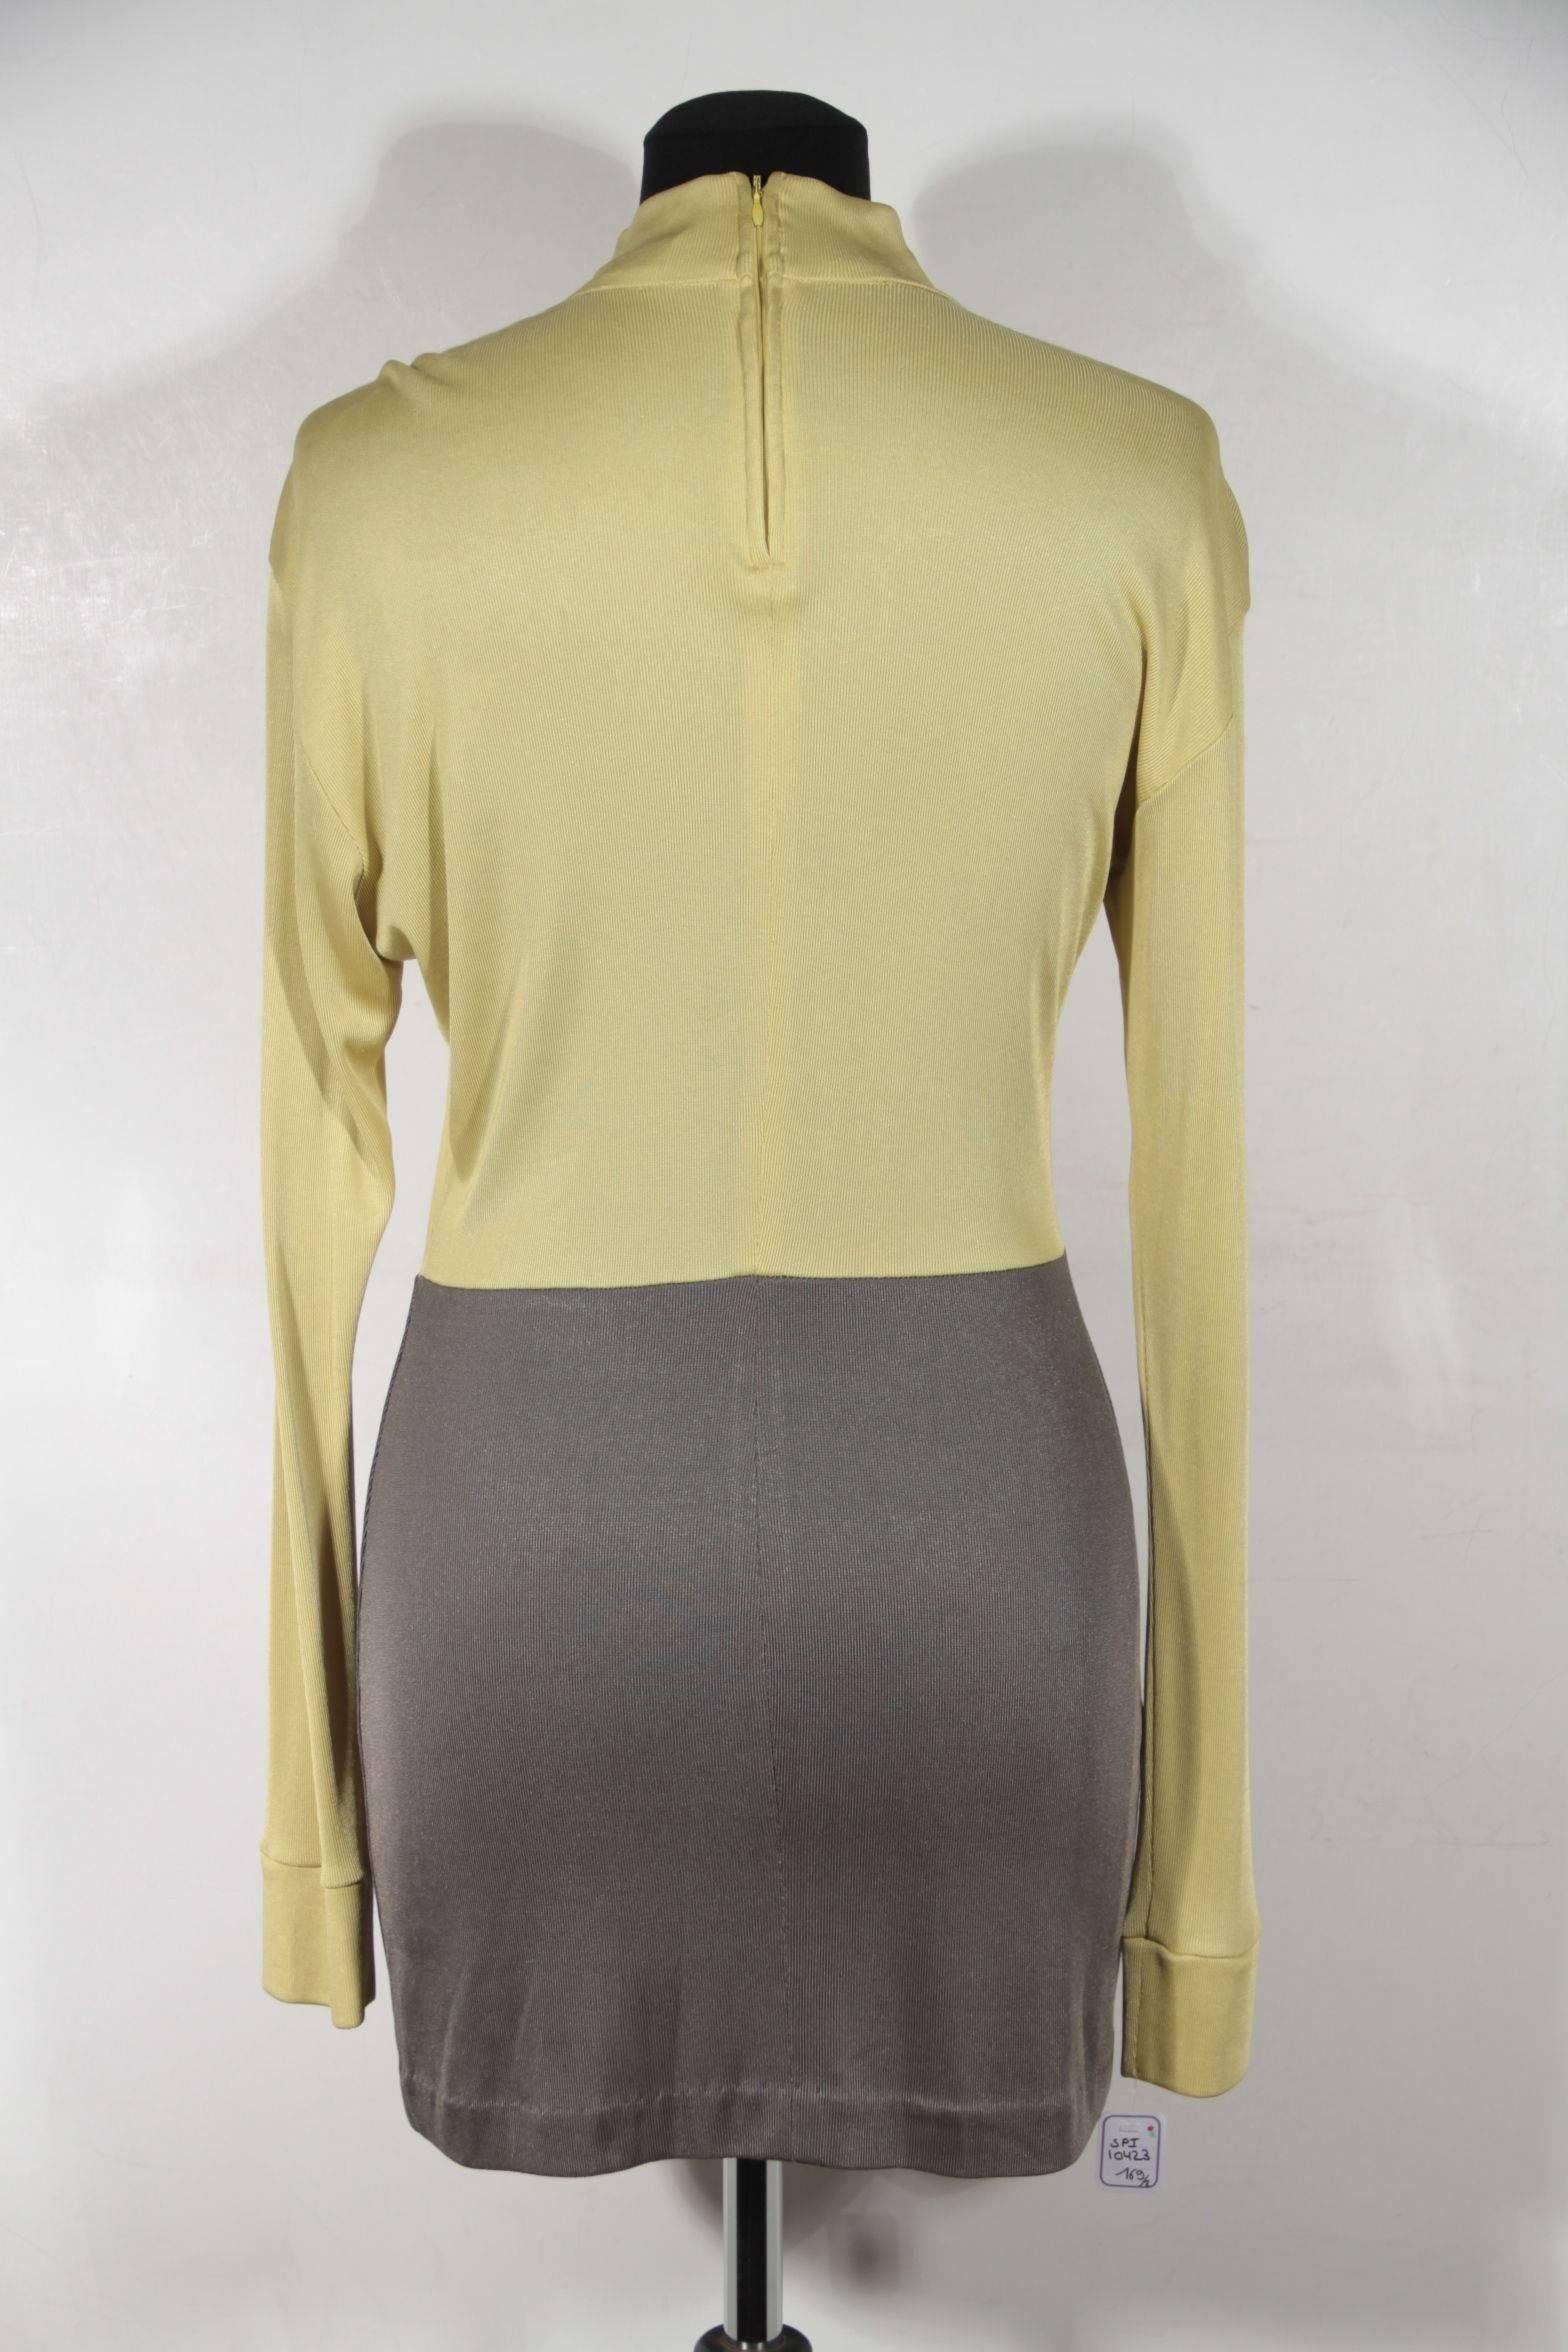 Brown ISSEY MIYAKE Vintage 80s Green & Gray TURTLE NECK TUNIC Long Sleeve Top BLOUSE